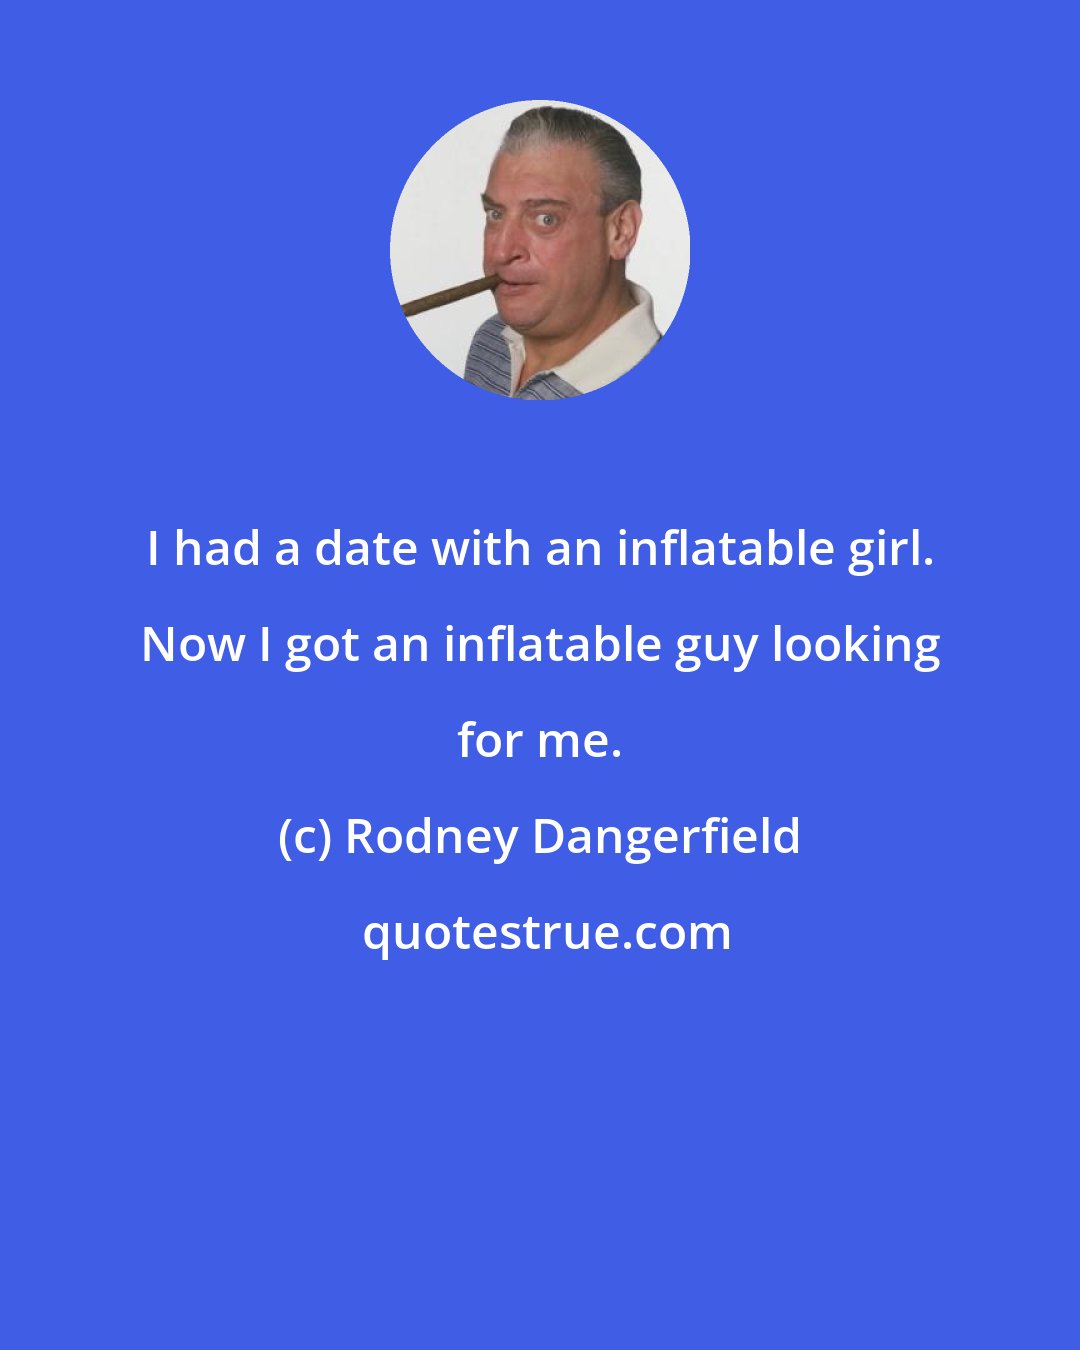 Rodney Dangerfield: I had a date with an inflatable girl. Now I got an inflatable guy looking for me.